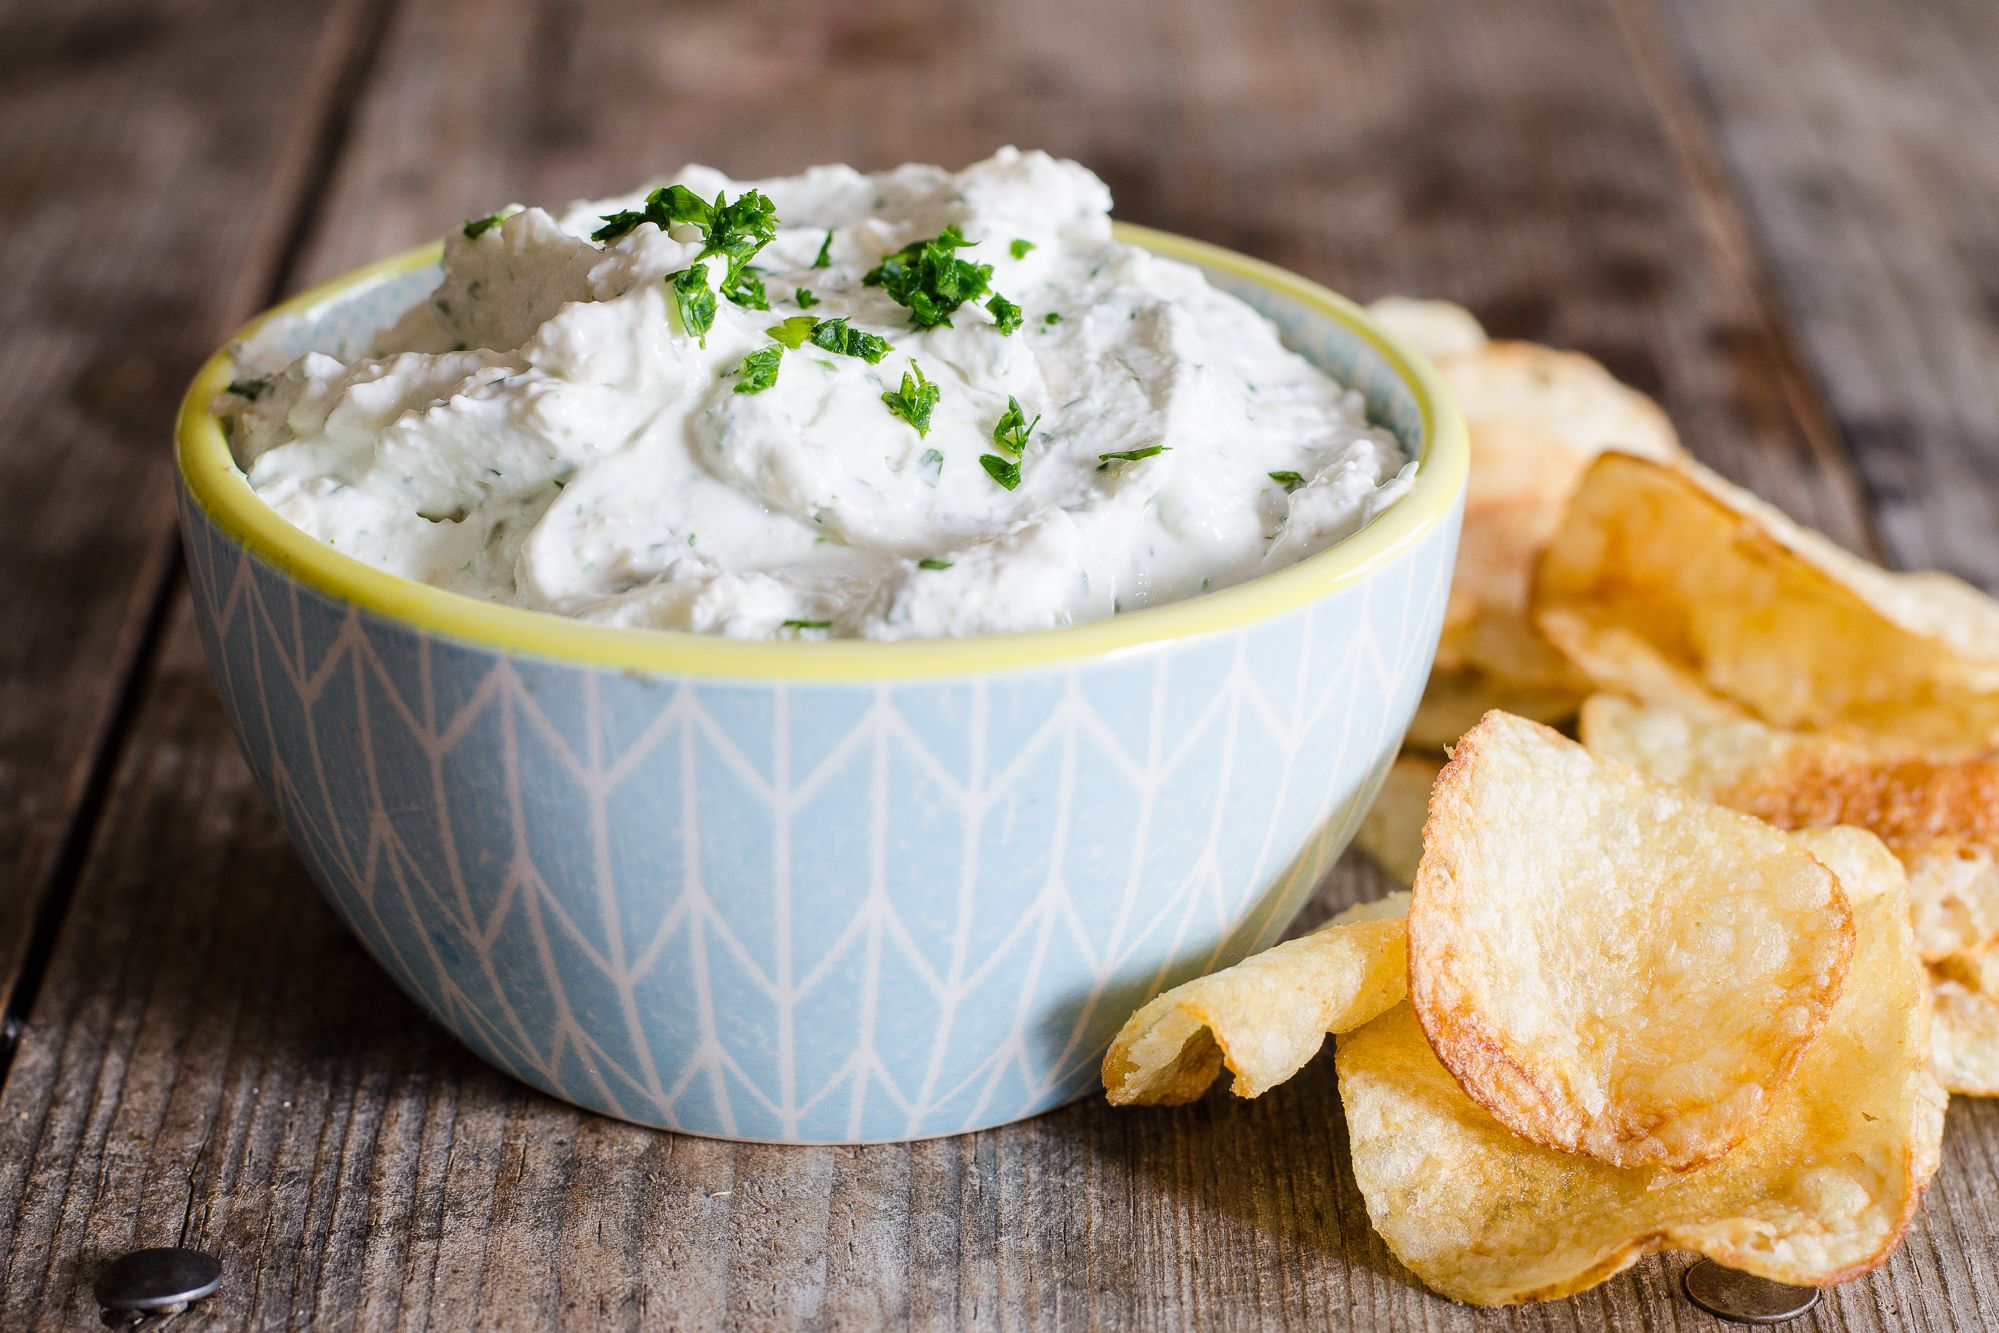 https://hips.hearstapps.com/thepioneerwoman/wp-content/uploads/2016/01/homemade-french-onion-chip-dip-01.jpg